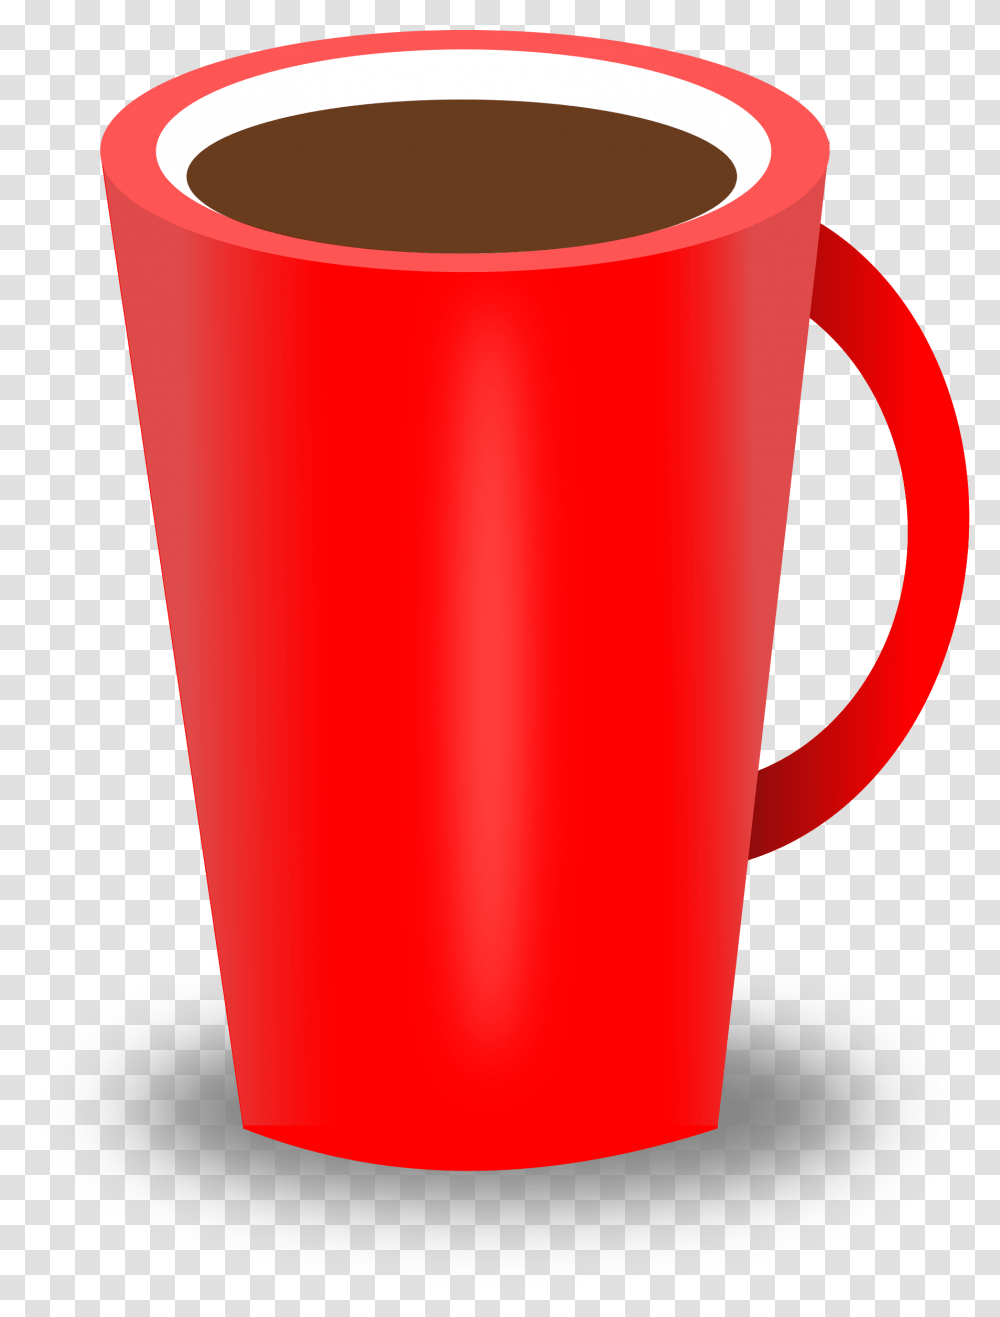 Cupredtablewareclip Artcylindermaterial Red Coffee Cup Clipart, Ketchup, Food, Glass, Weapon Transparent Png